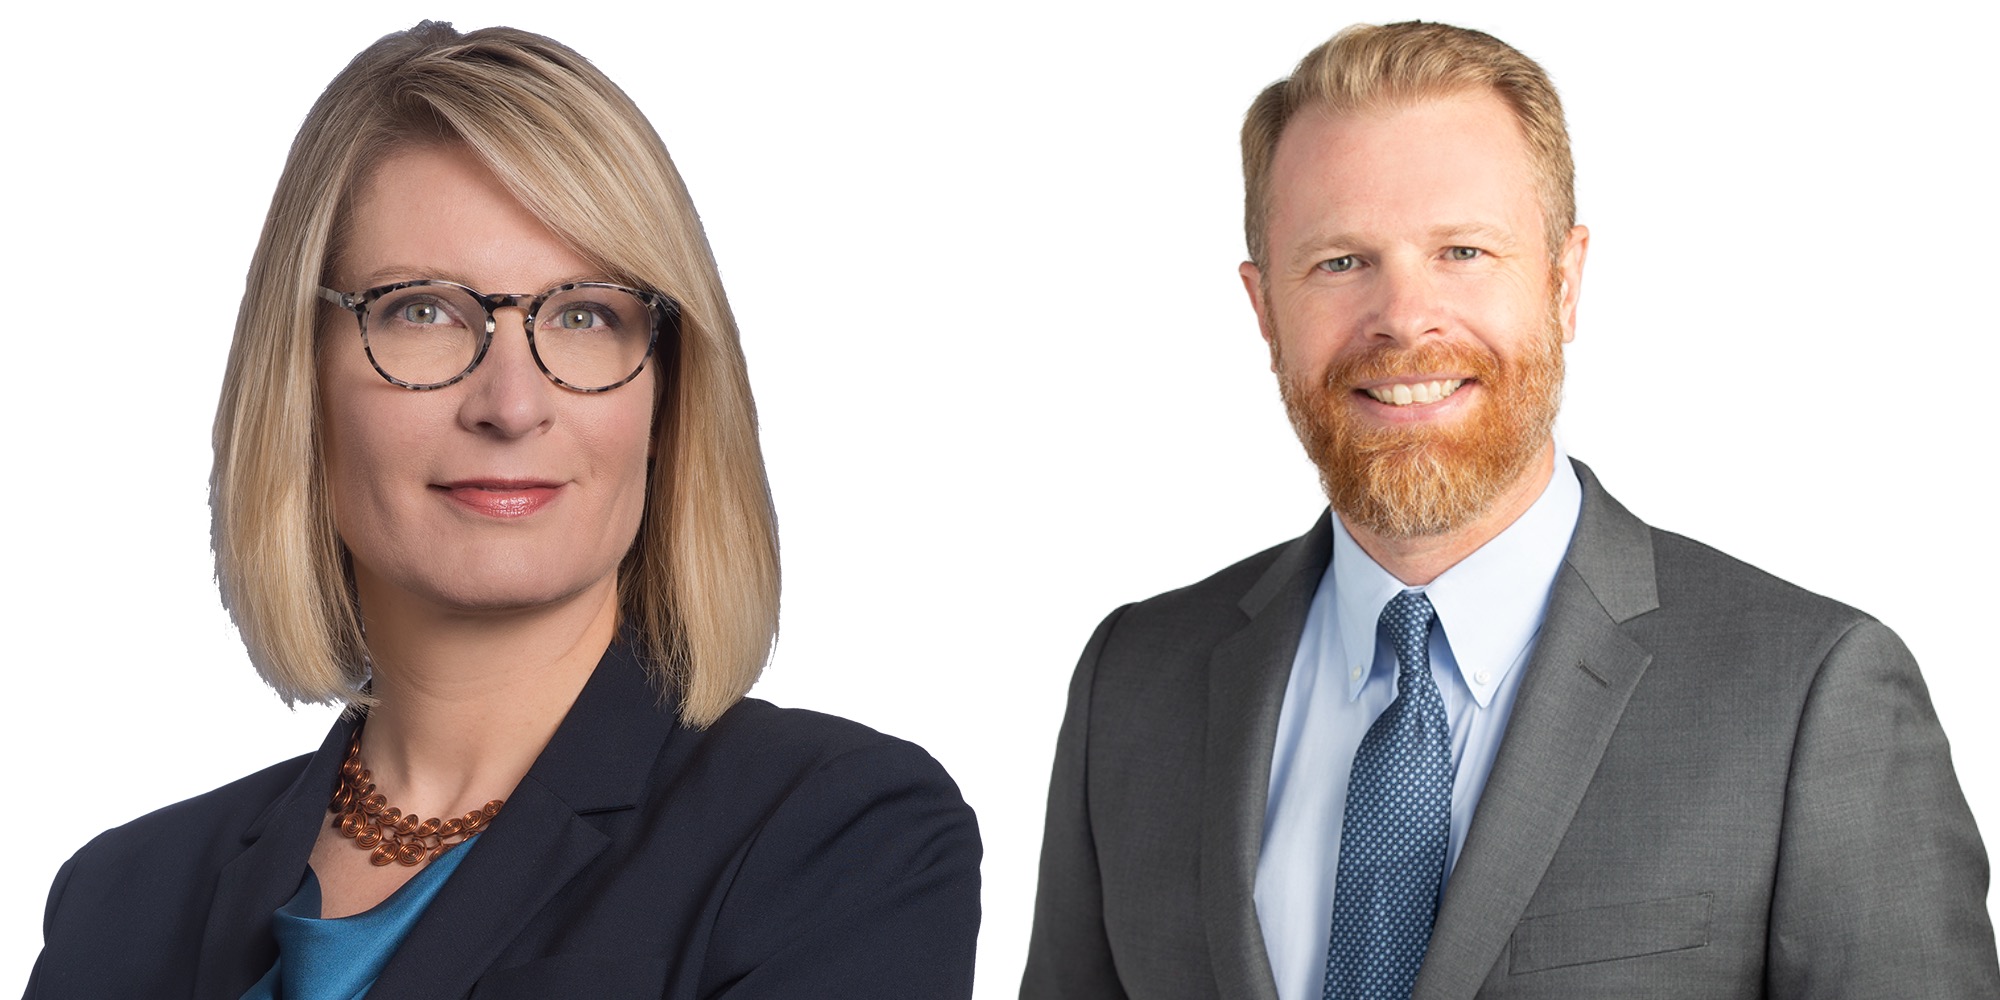 Anne D. Cartwright is an attorney in Husch Blackwell LLP's Kansas City office, and Scott Schneider is an Austin-based partner with Husch Blackwell LLP.